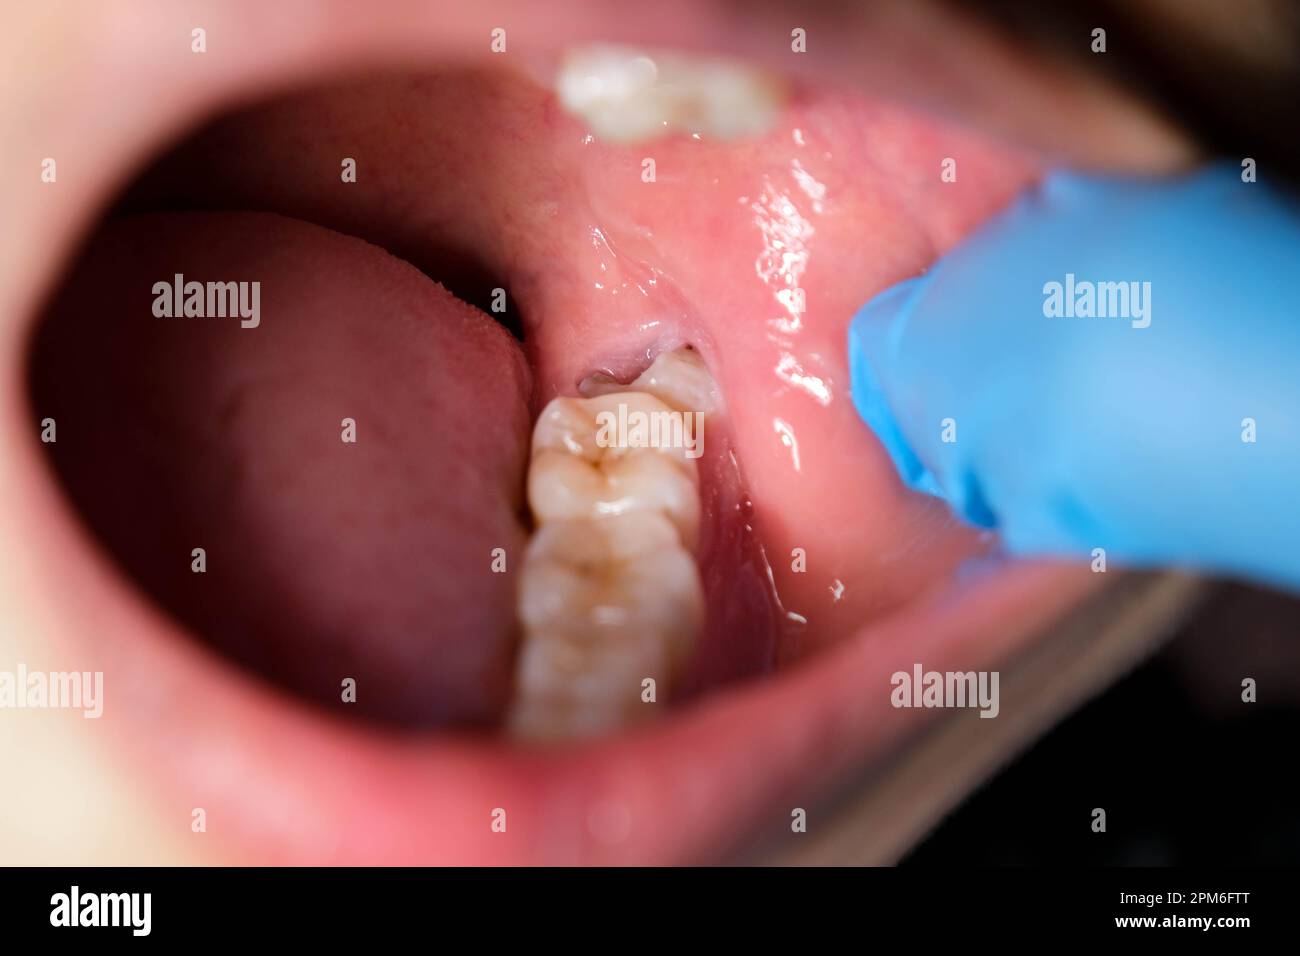 Wisdom teeth affect and cause gum recession. Stock Photo